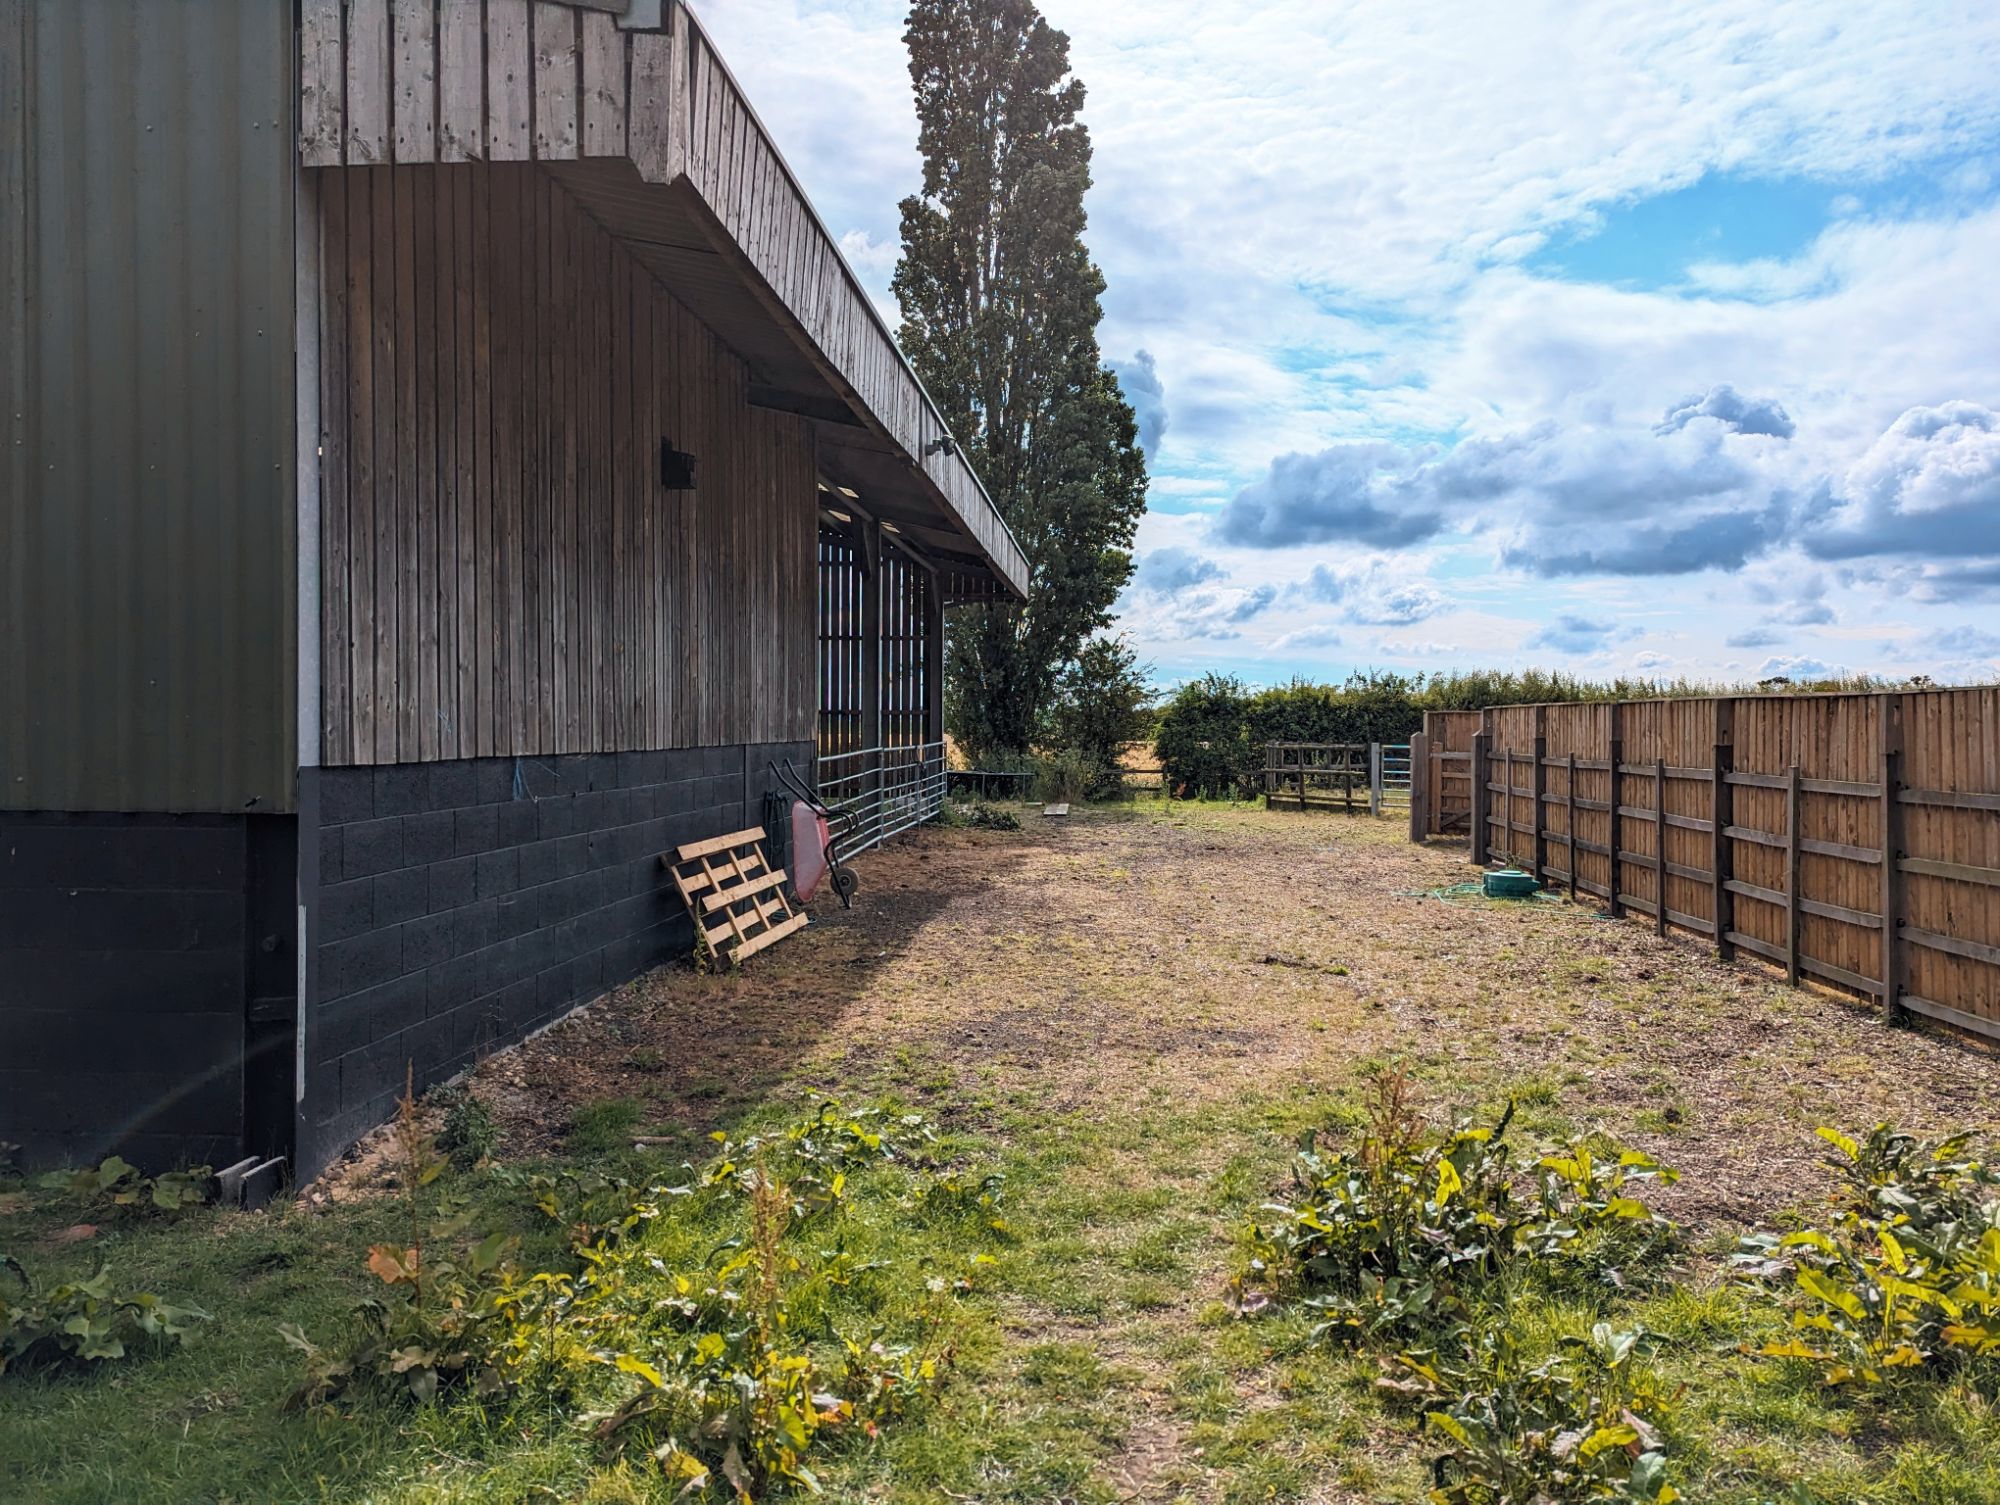 Class Q Conversion Approved - Plans have been approved today to convert a former agricultural barn into a substantial new home in Sturton by Stow near Lincoln